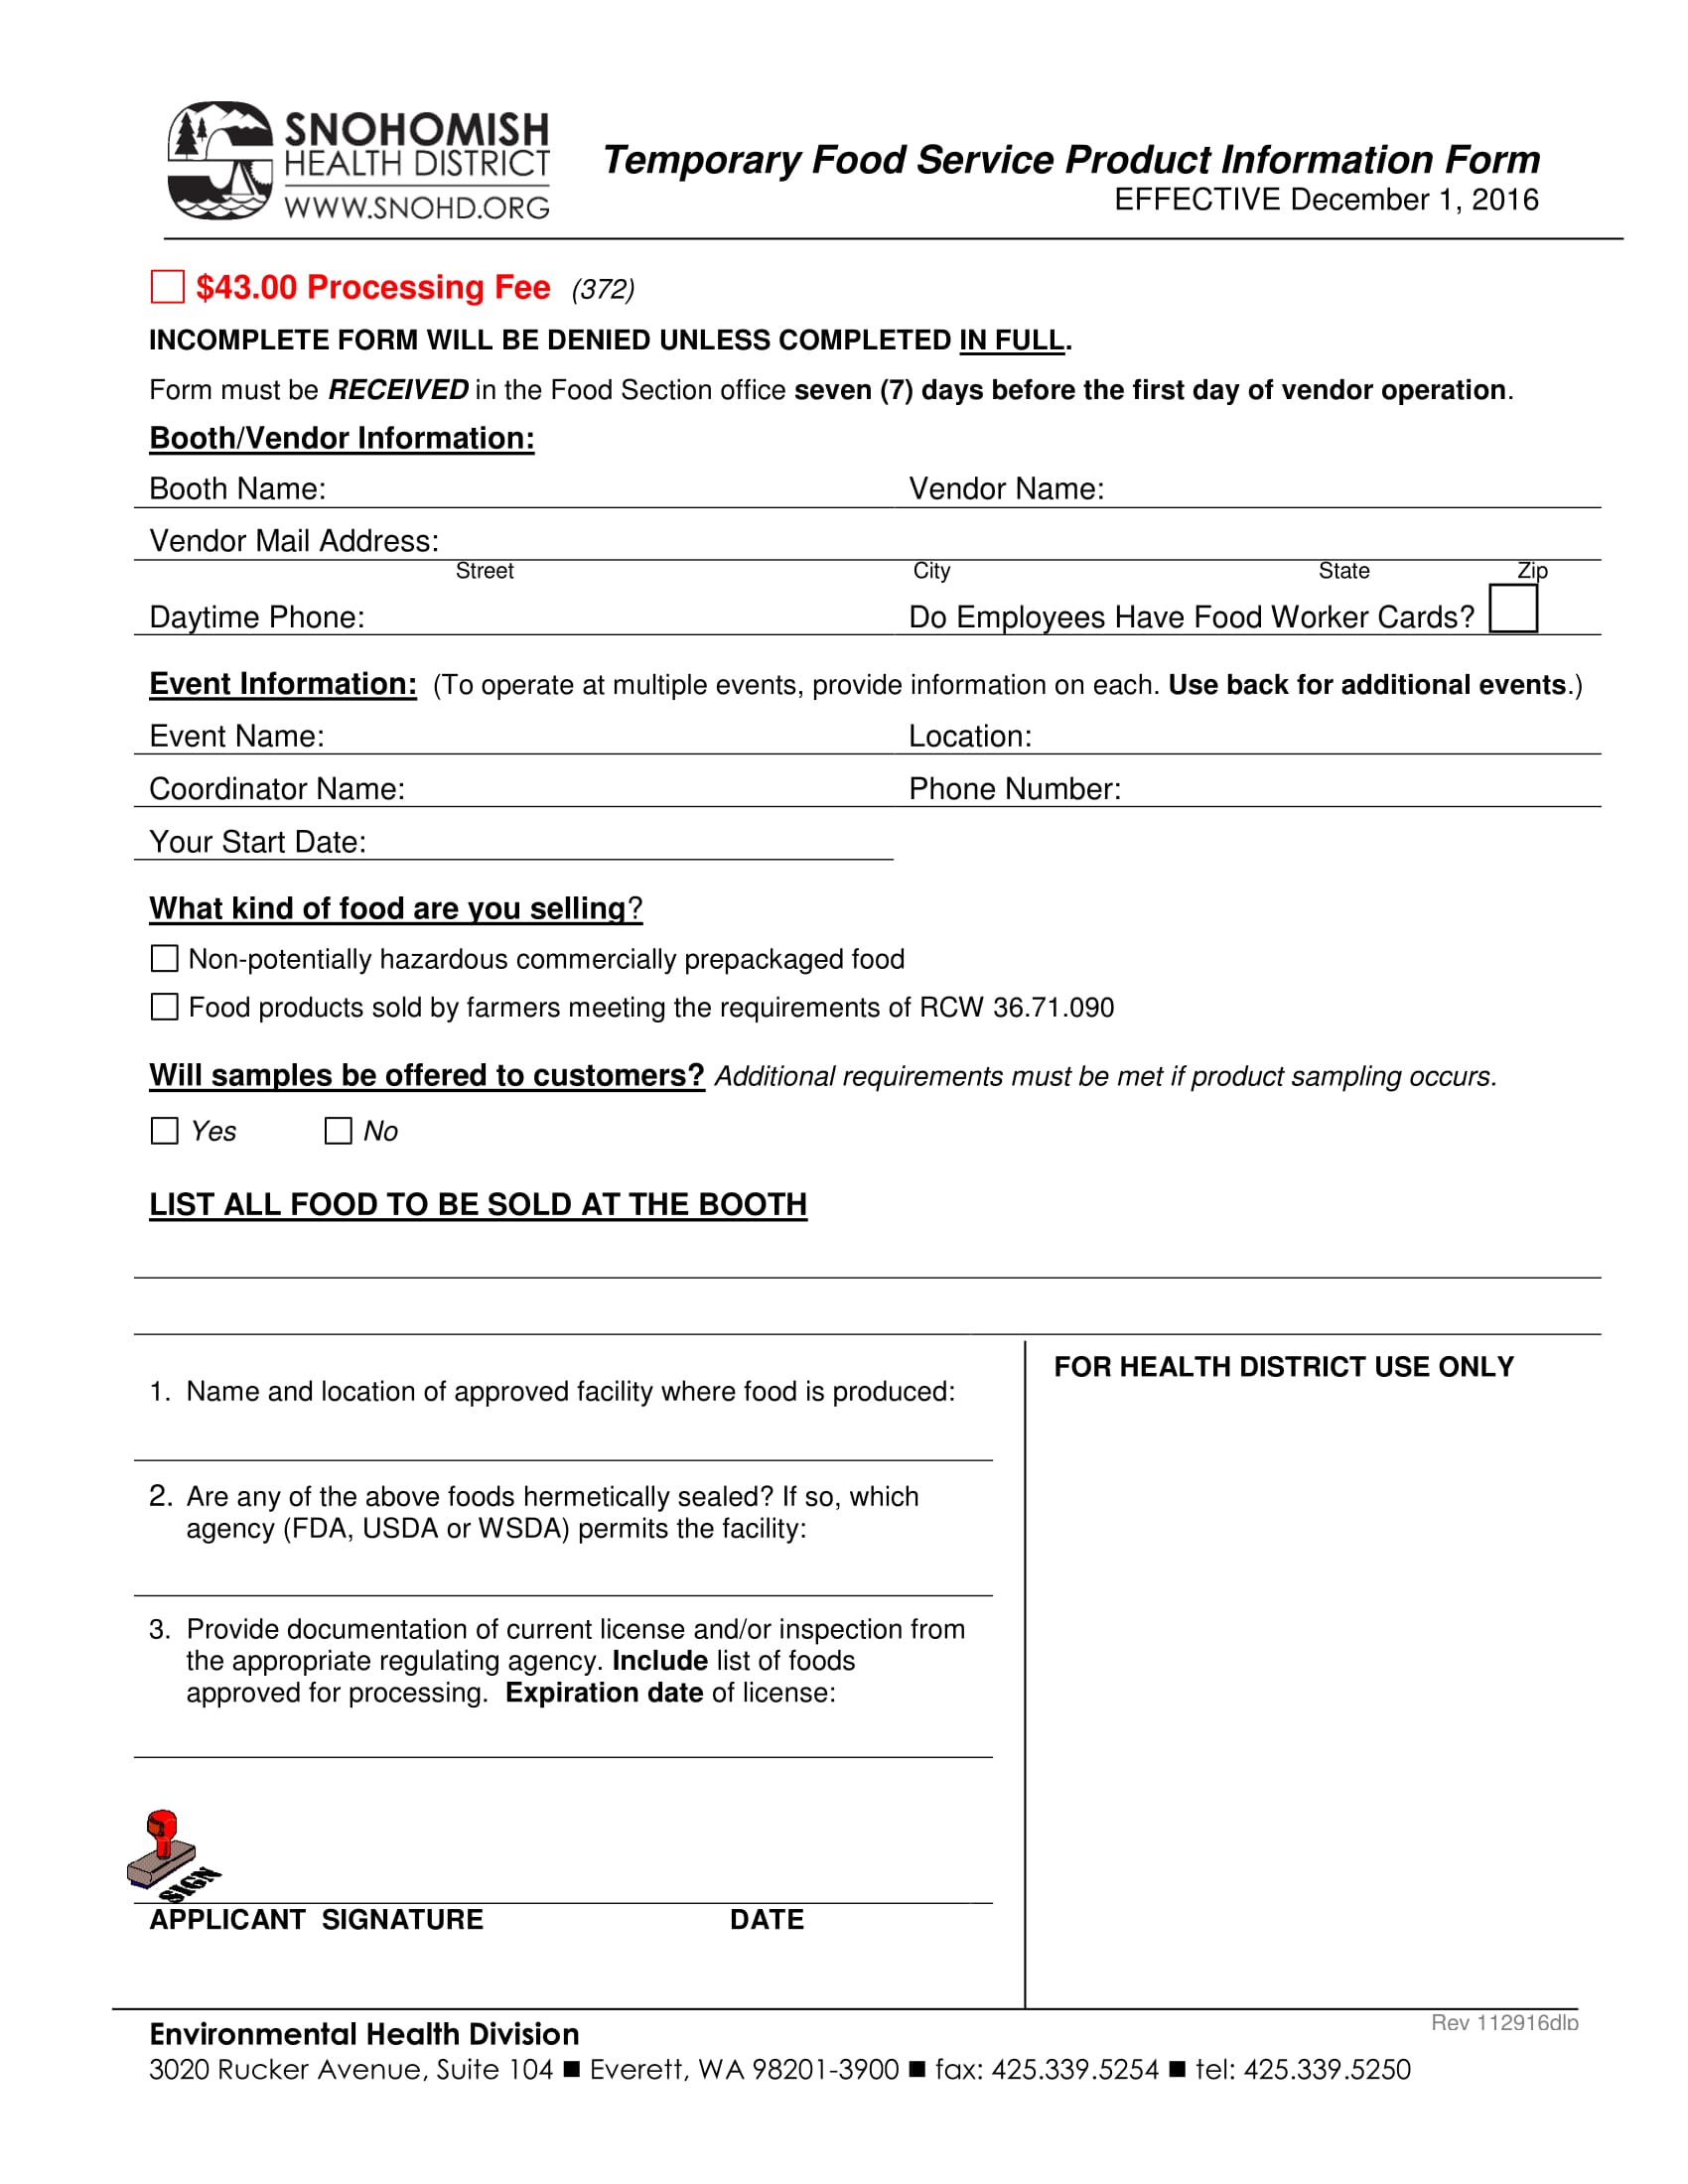 fillable product information form in pdf 1